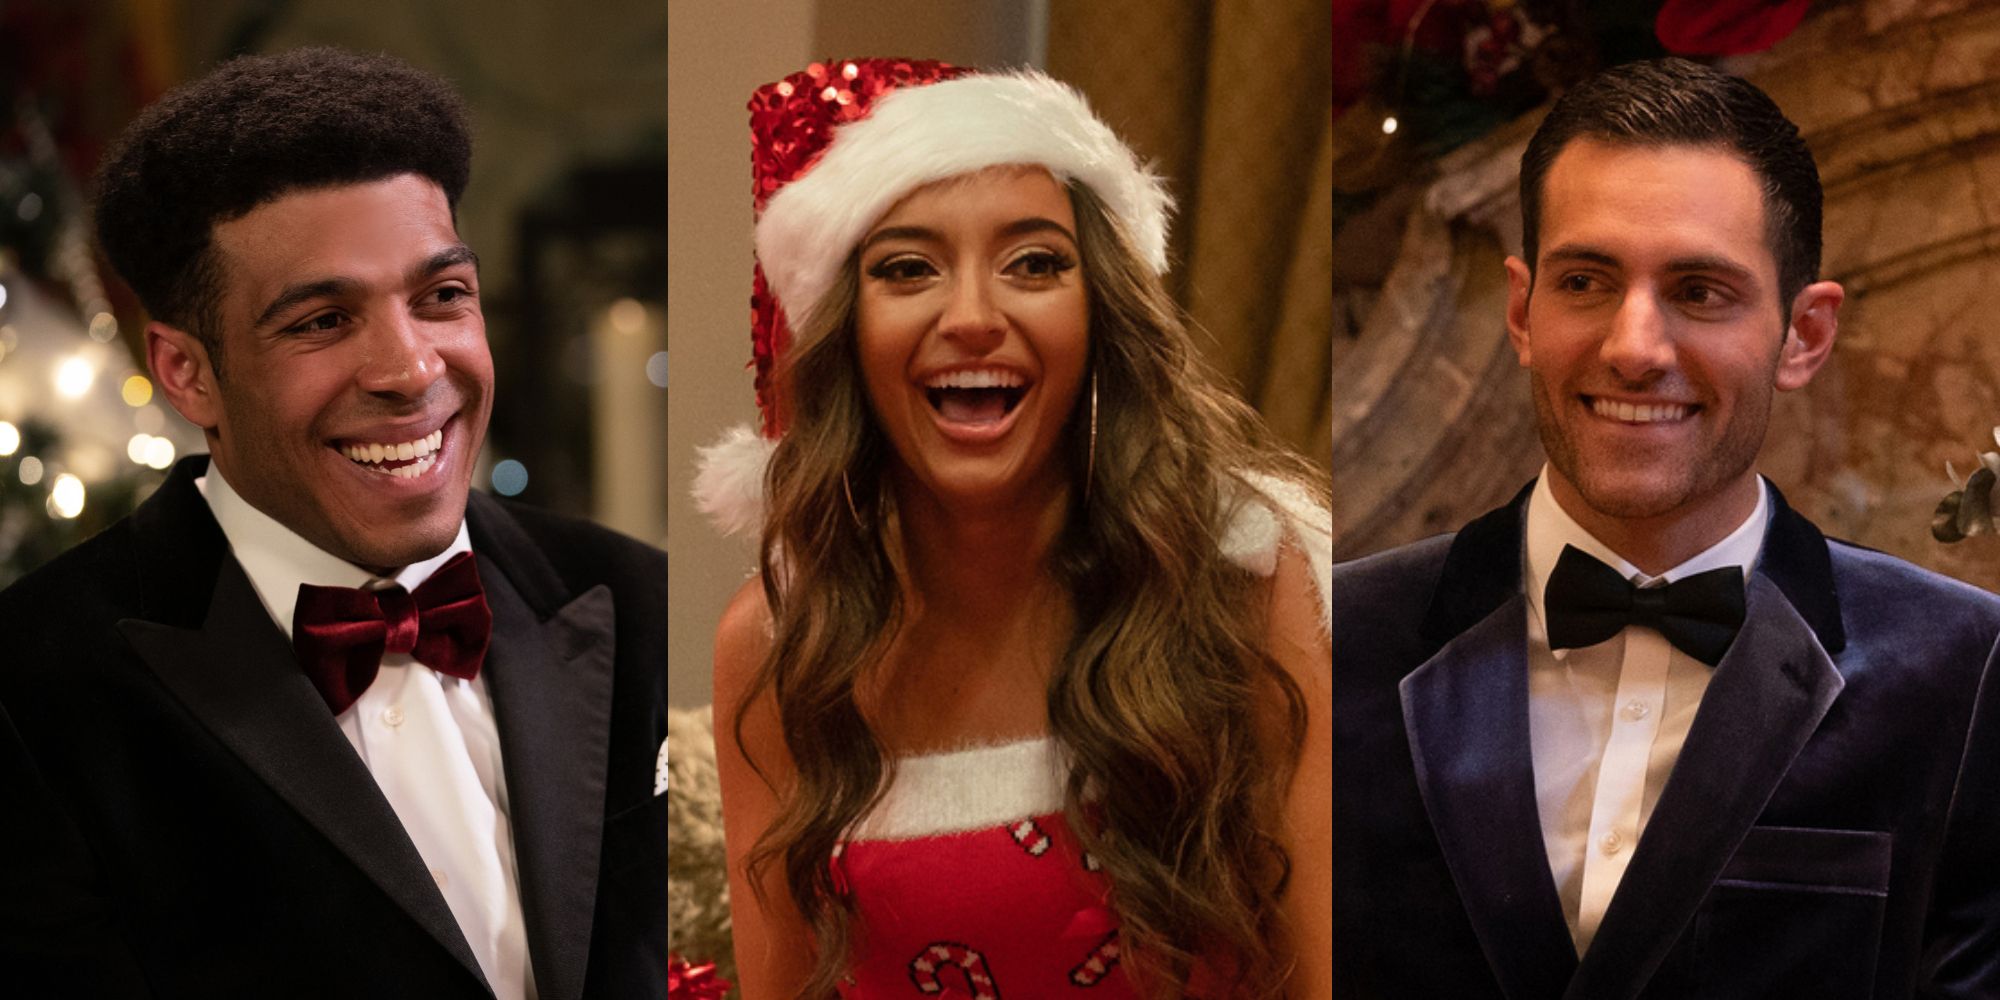 12 Dates Of Christmas Where To Follow All The Castmates On Instagram